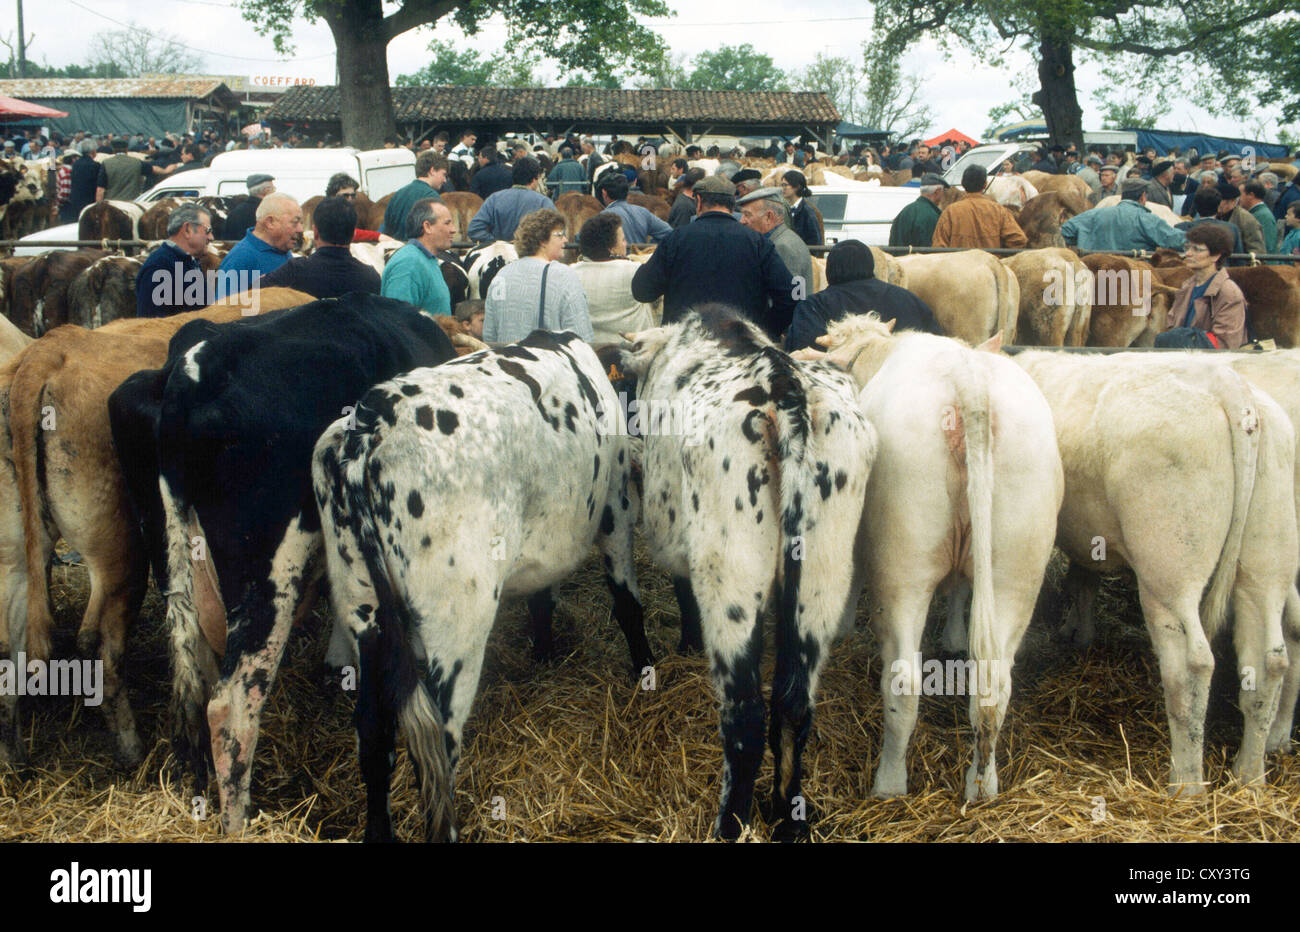 Cattle and people  at a country fair Dordogne France Stock Photo